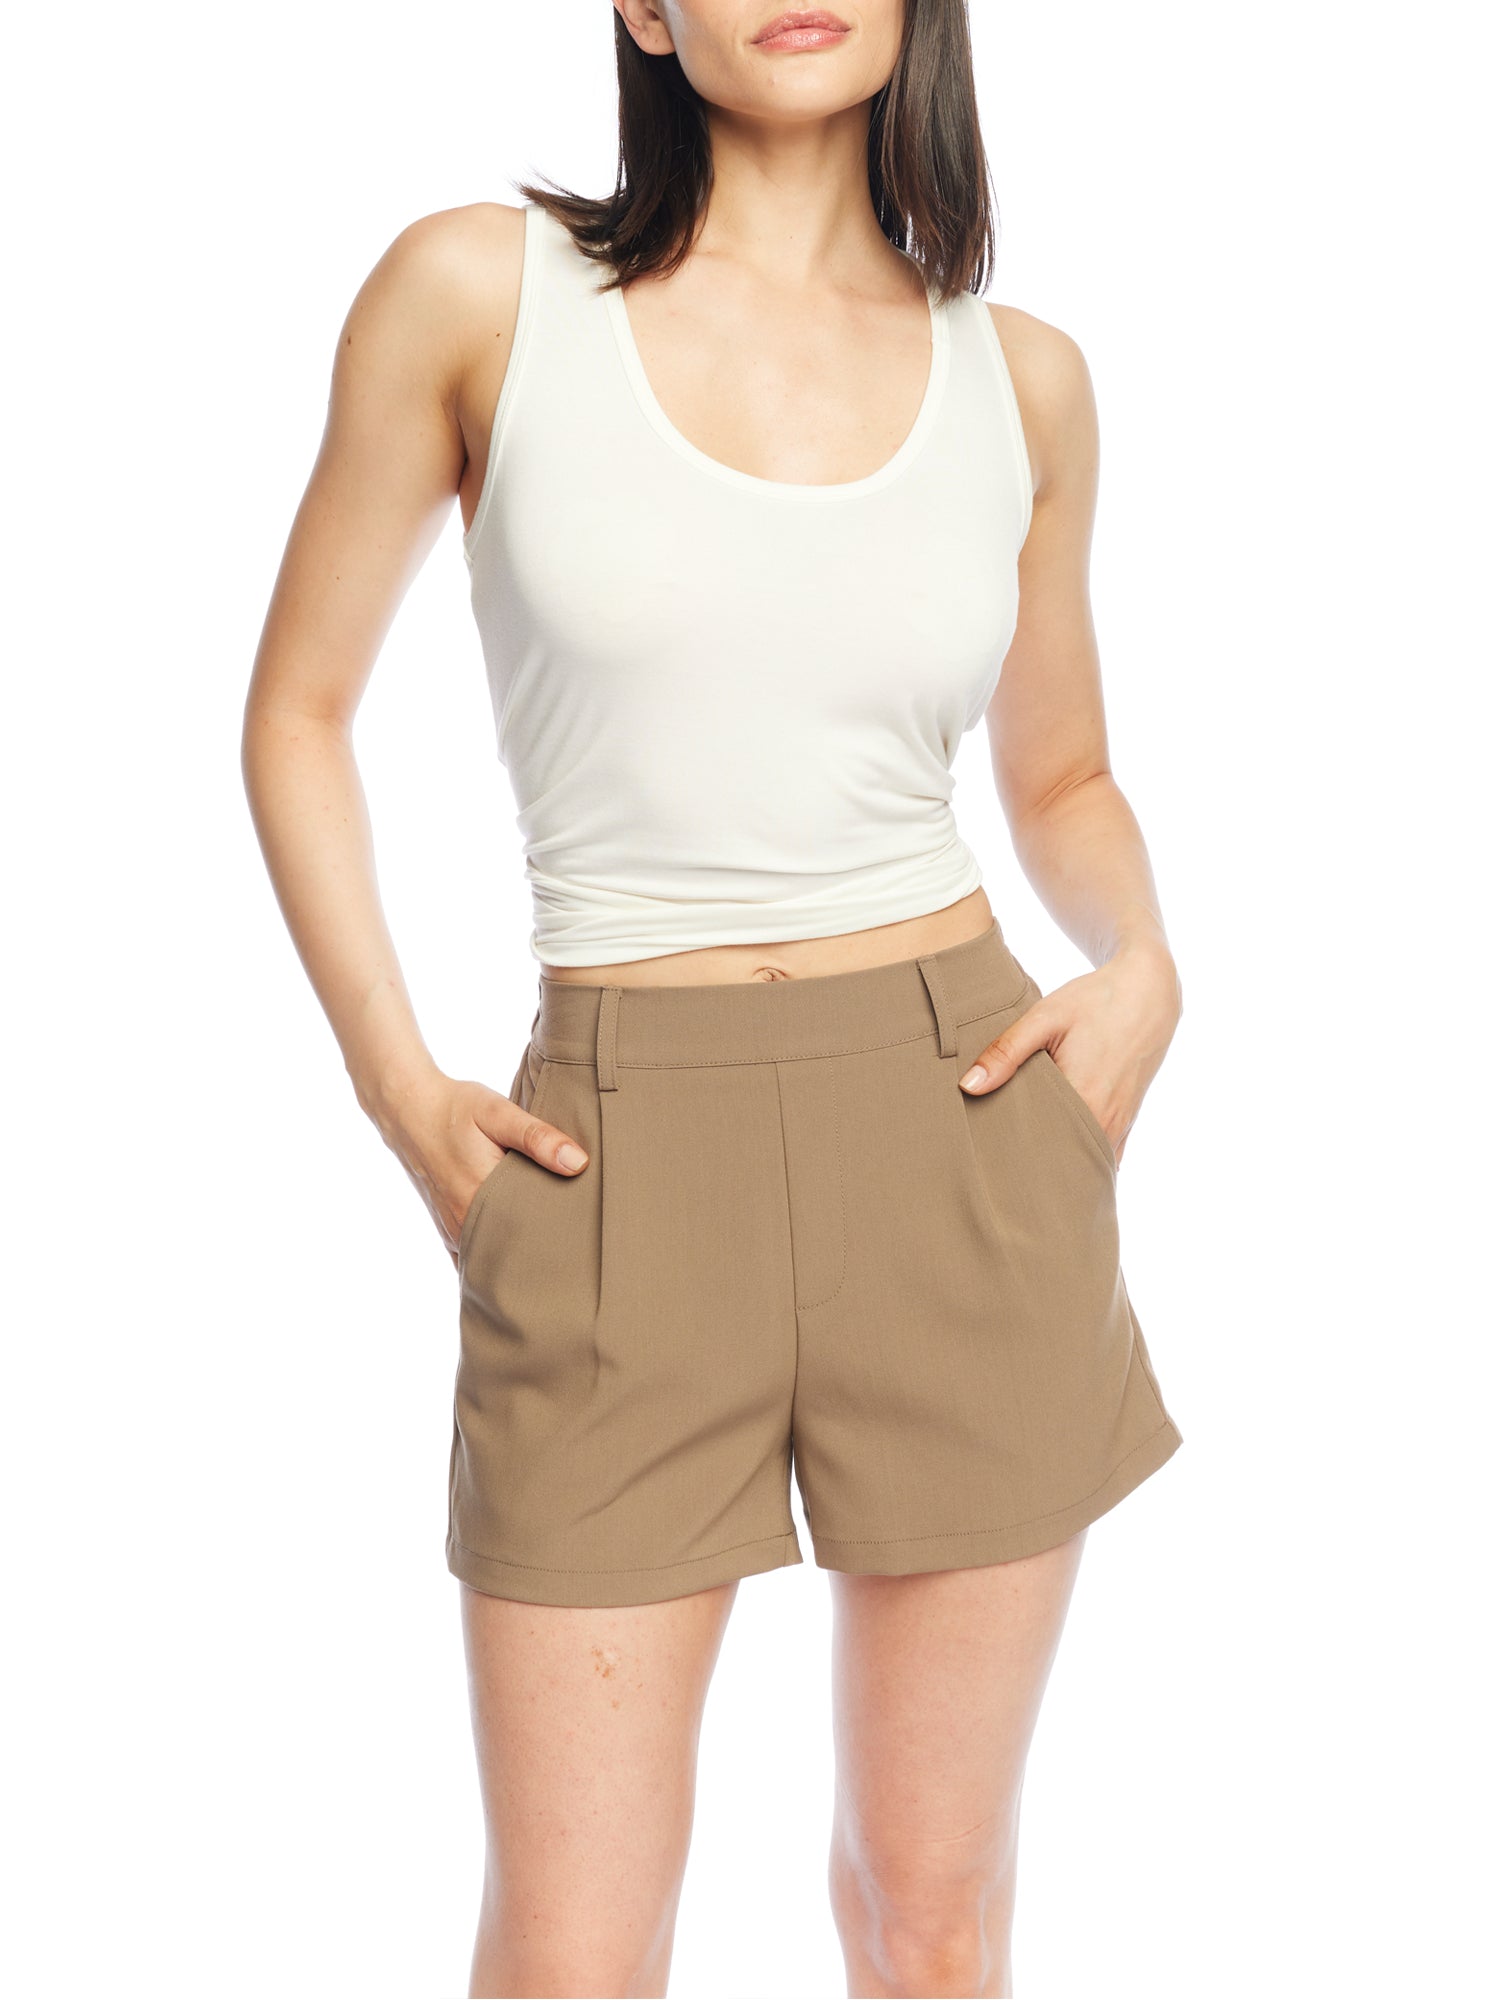 pleated shorts with a flattering mid rise, elasticized back waist, belt loops and front & back pockets in mocha